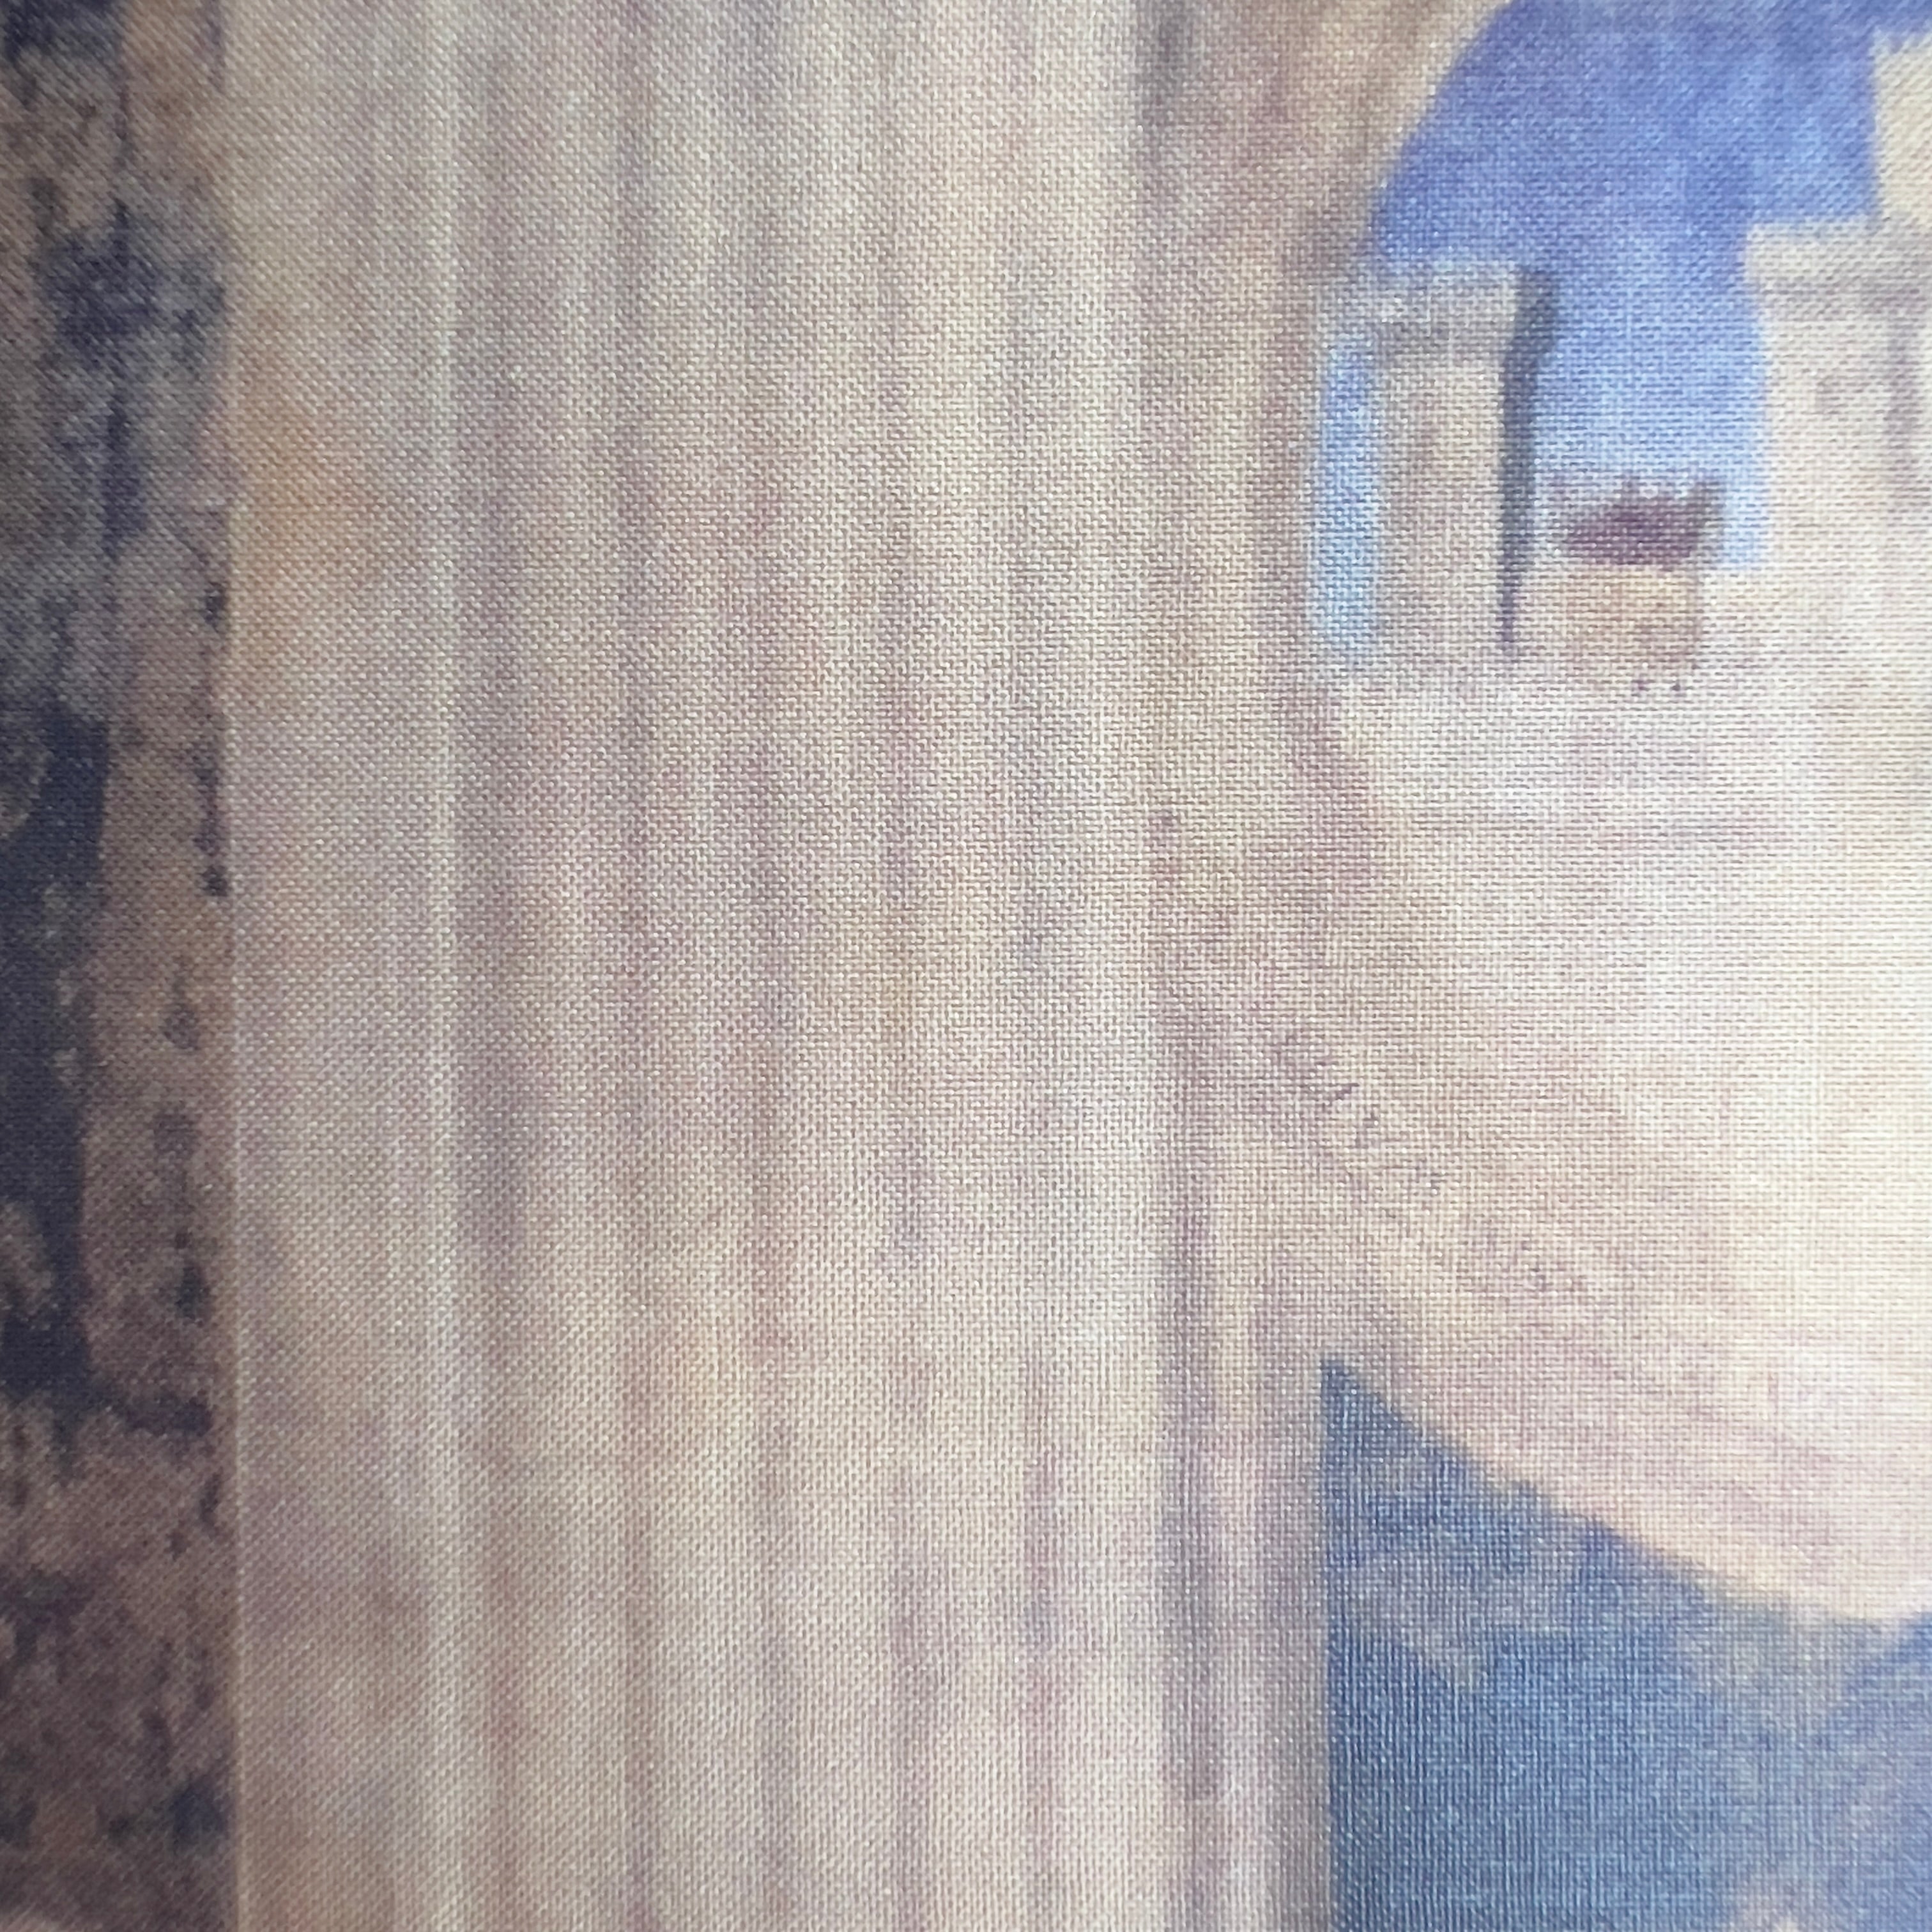 Detail with texture of canvas cover visible